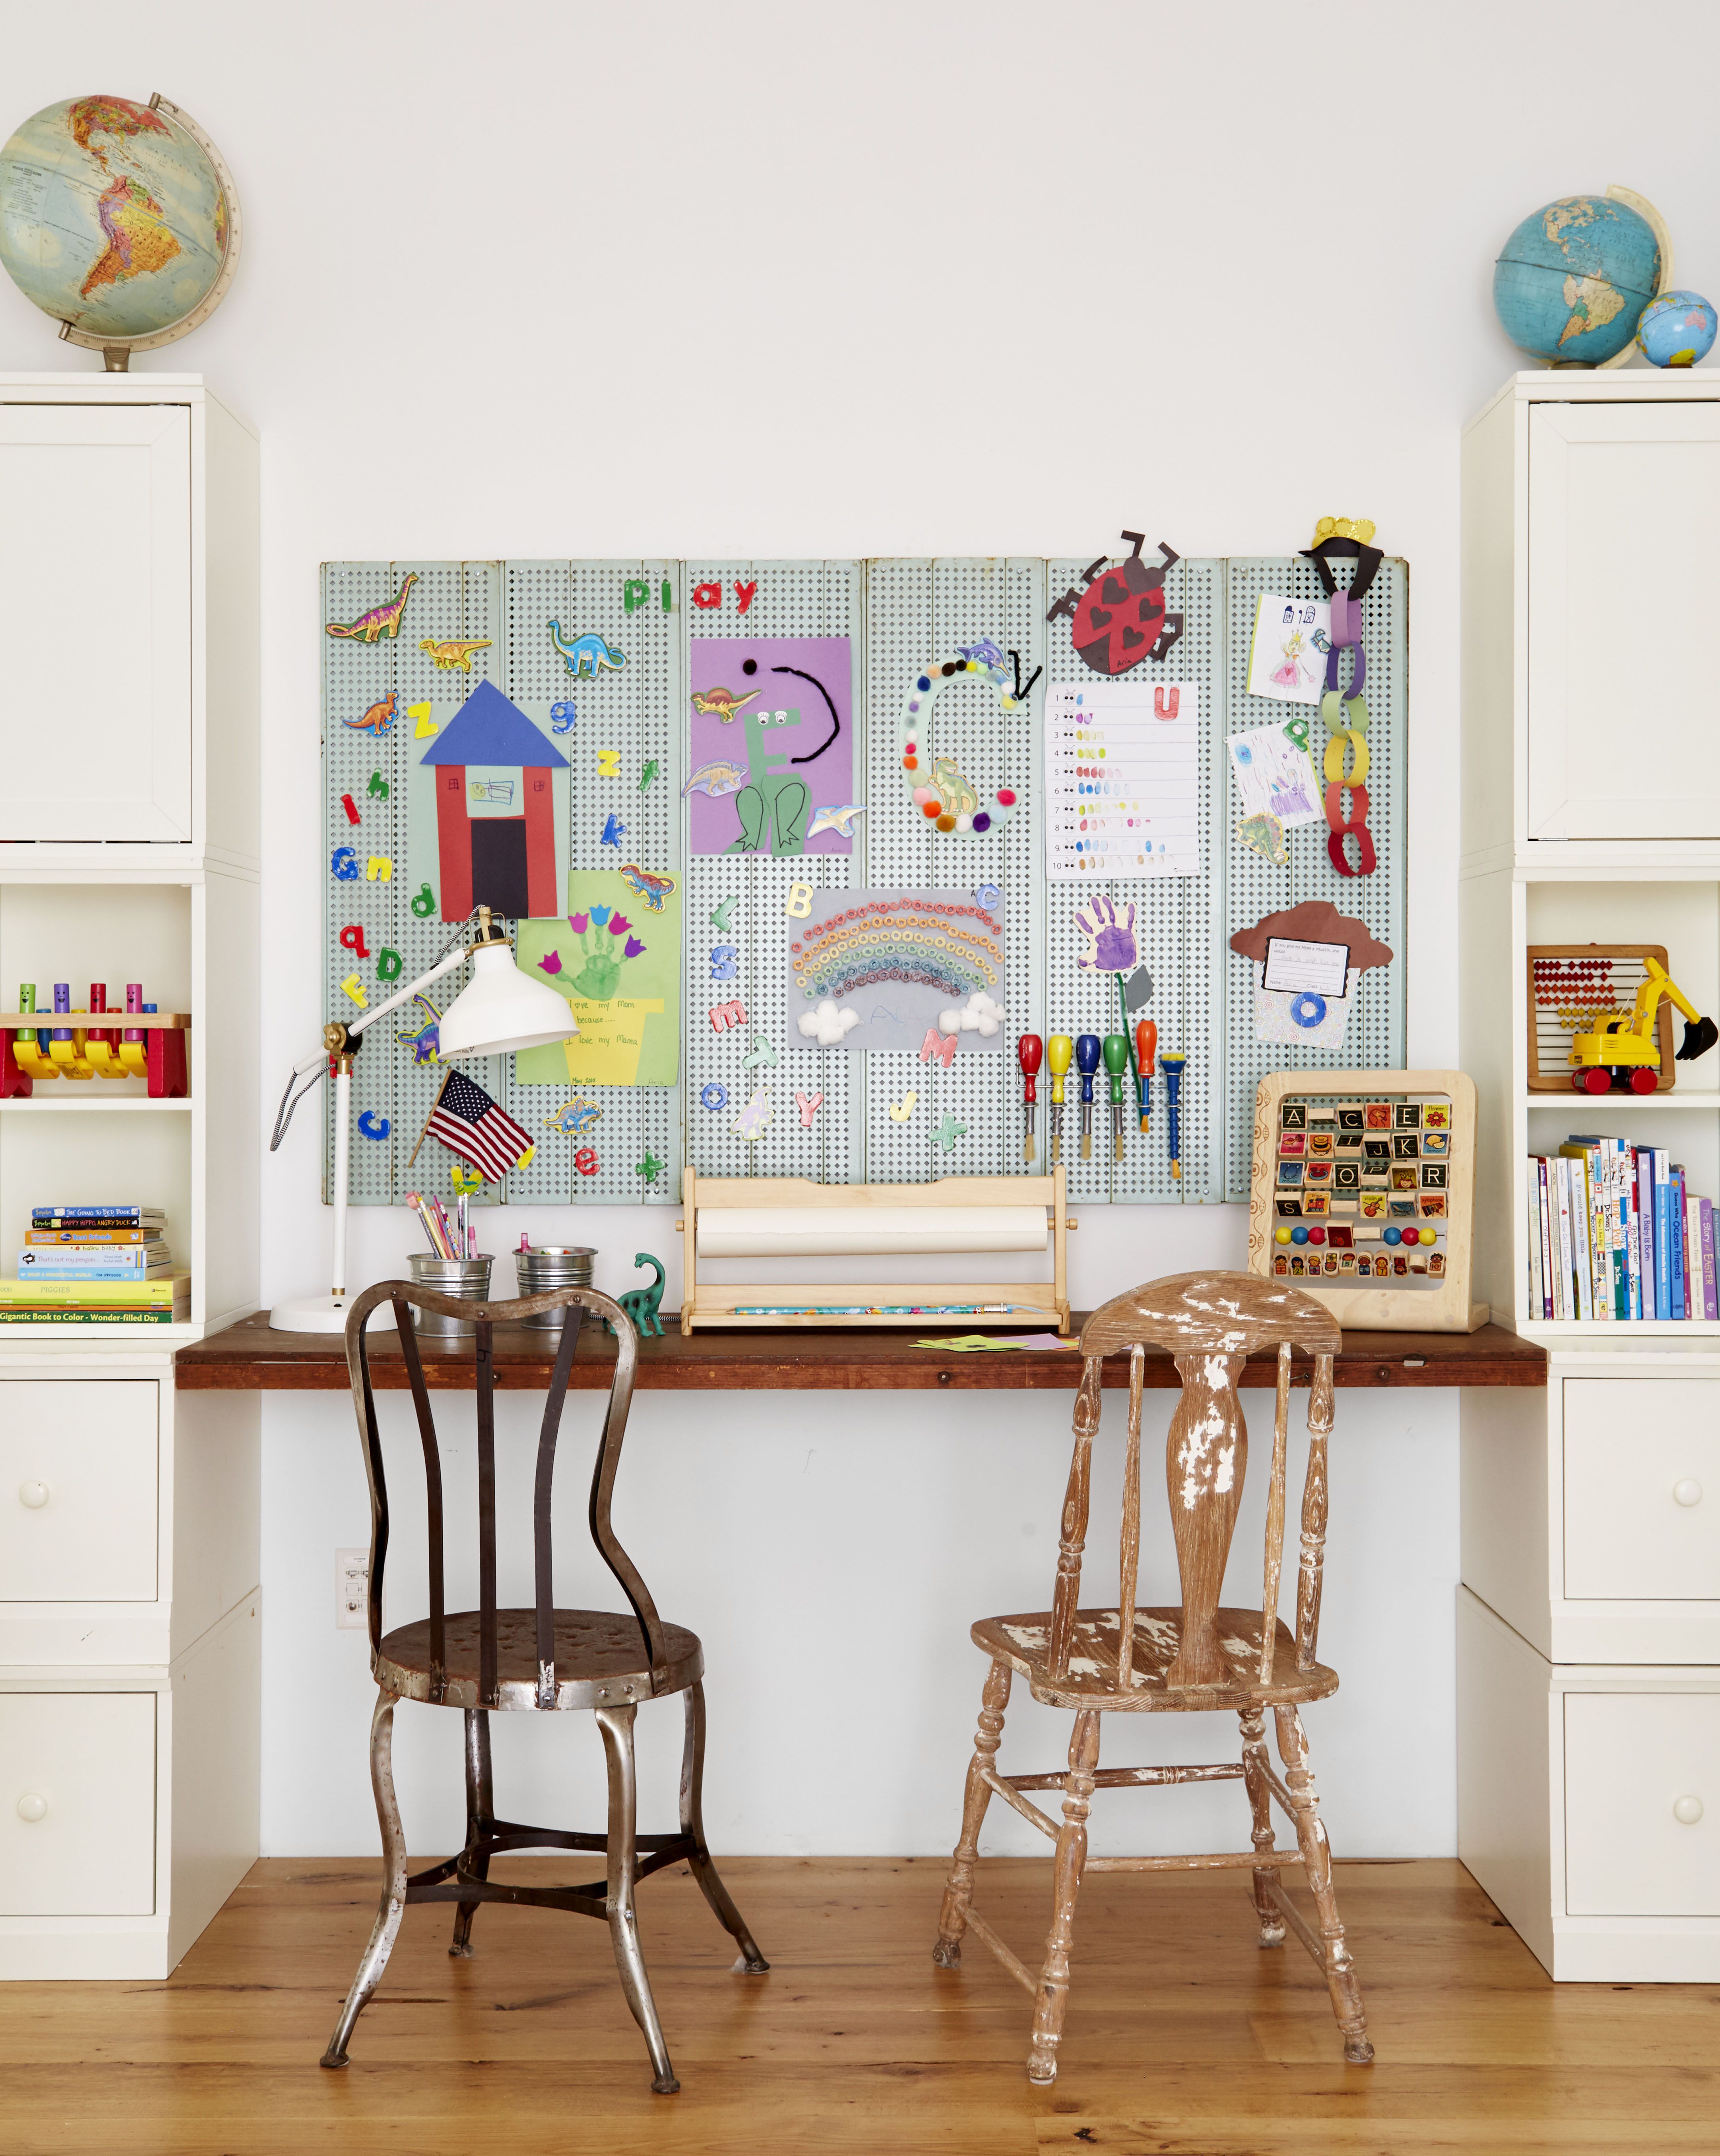 study table for kids room